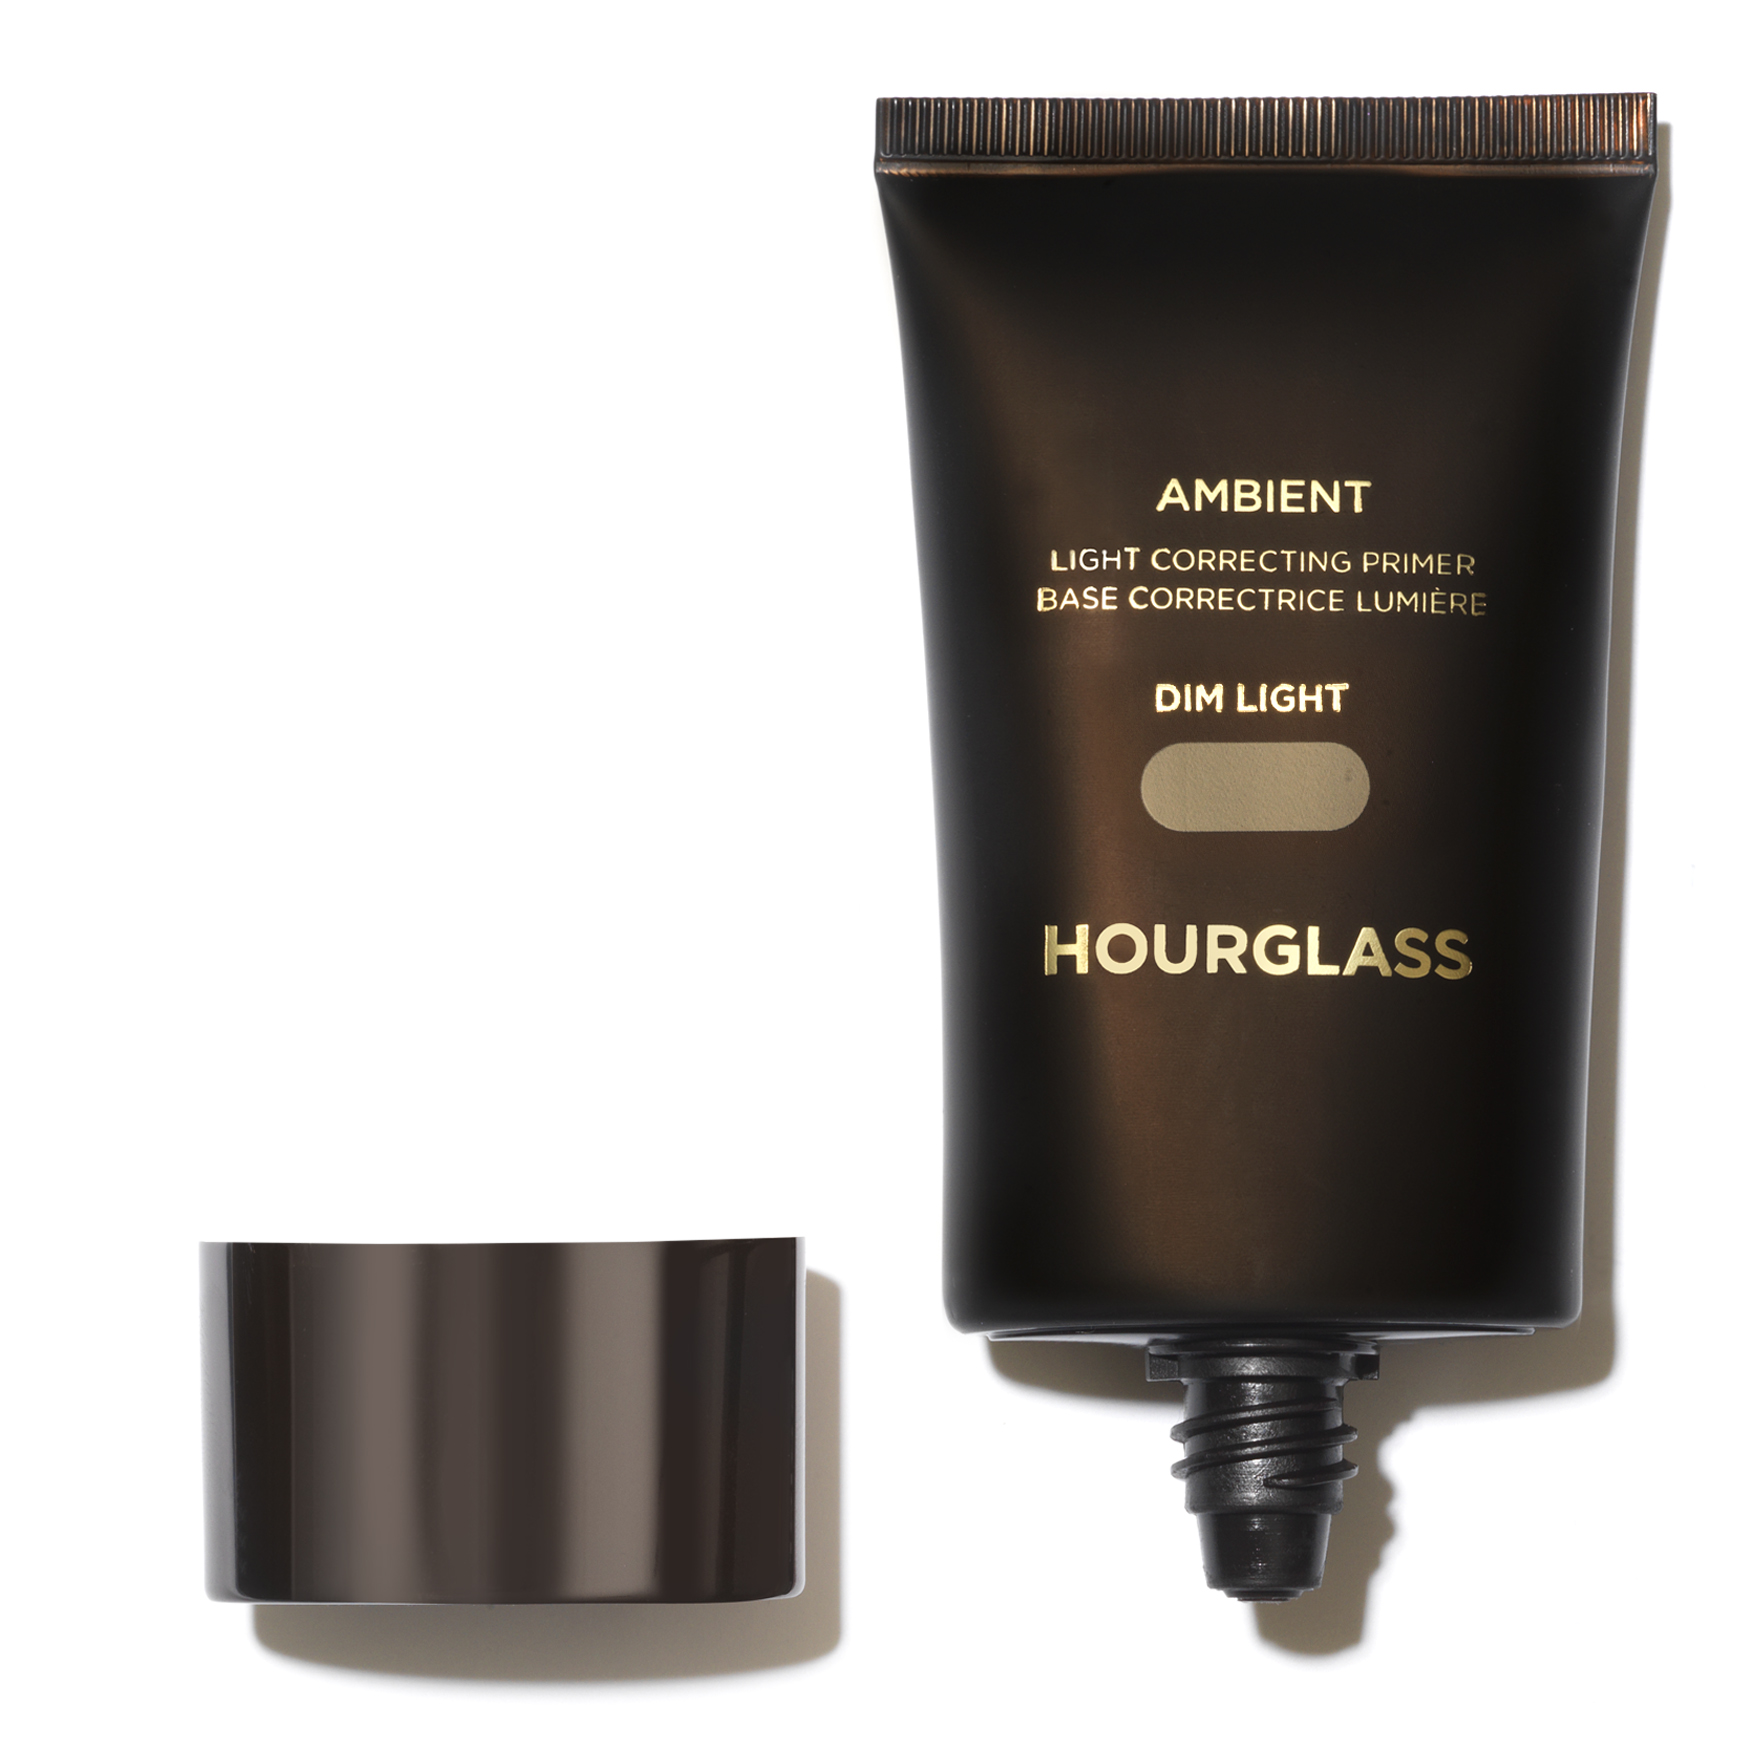 Hourglass Ambient Light Correcting Primer | Space NK